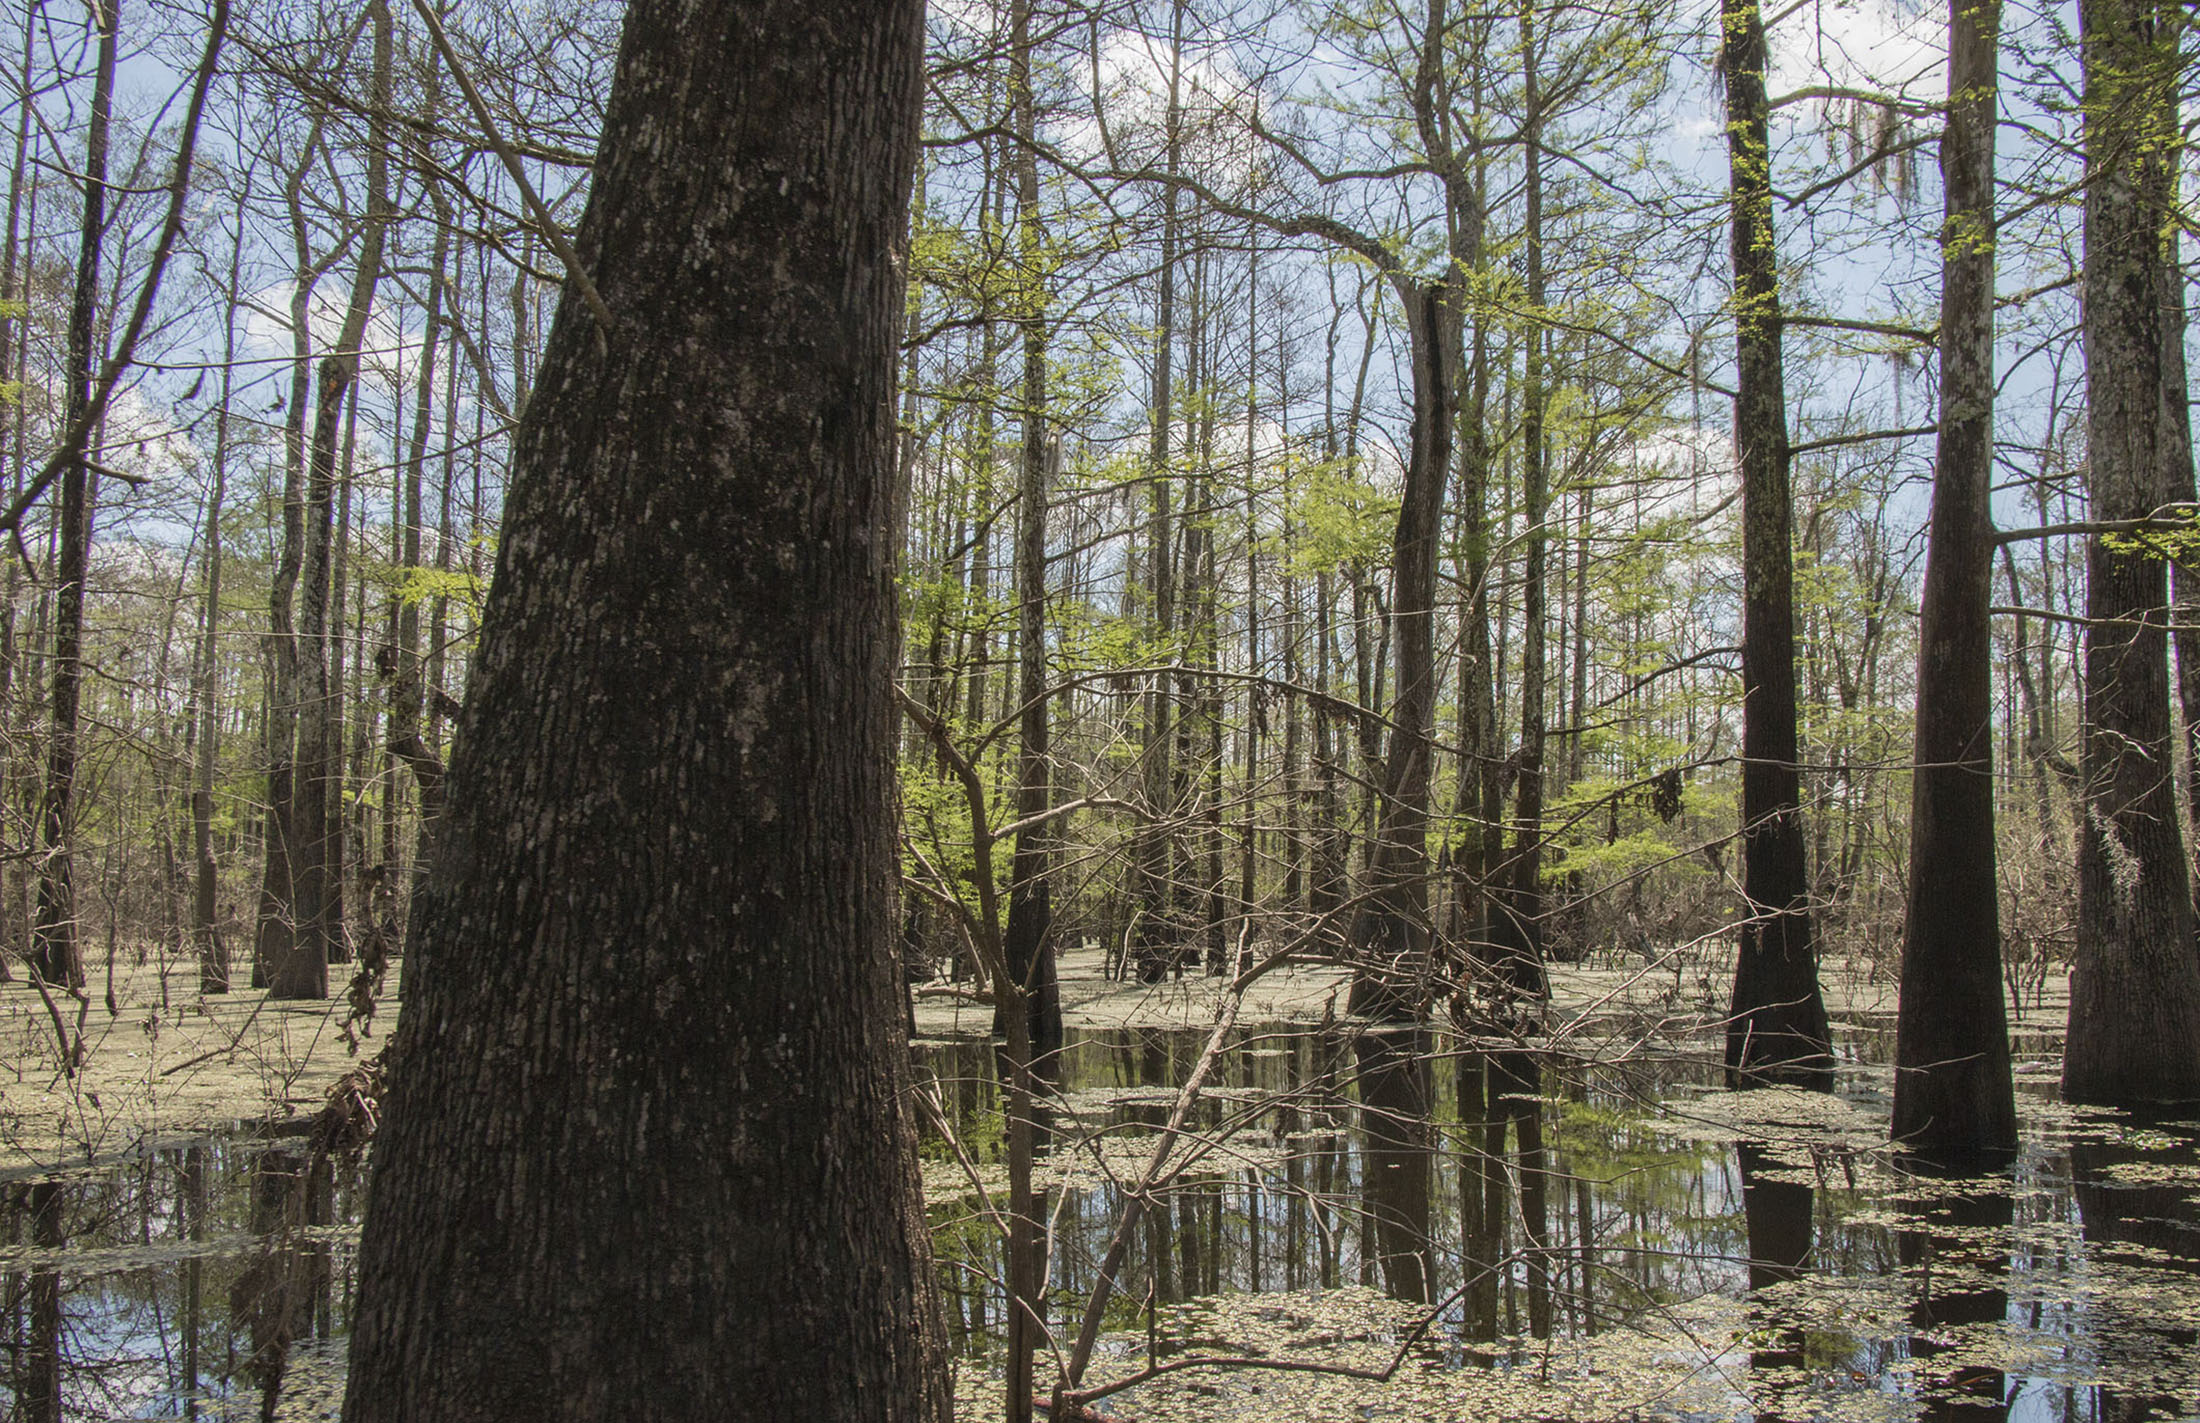 The swamps and wetland forests of the Atchafalaya Basin are filled with tupelo and cypress trees, which can grow for hundreds of years.